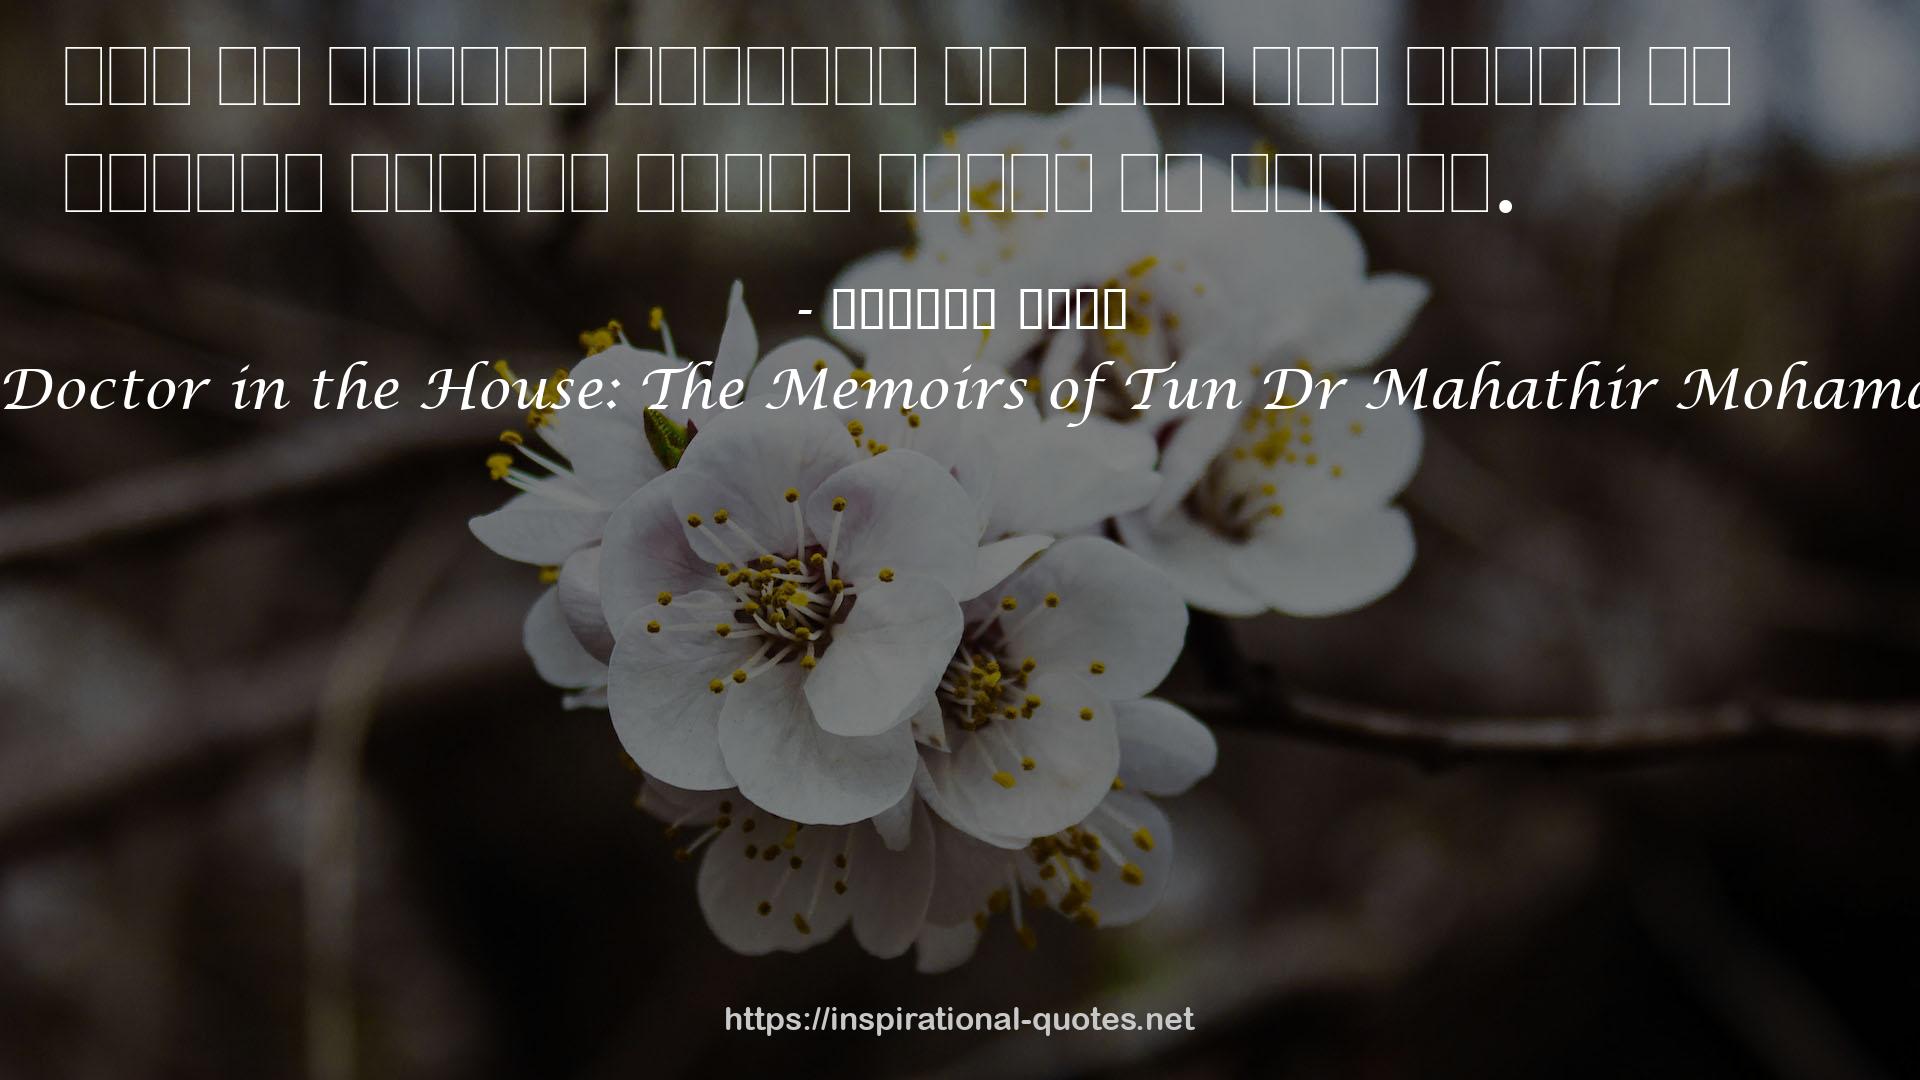 A Doctor in the House: The Memoirs of Tun Dr Mahathir Mohamad QUOTES